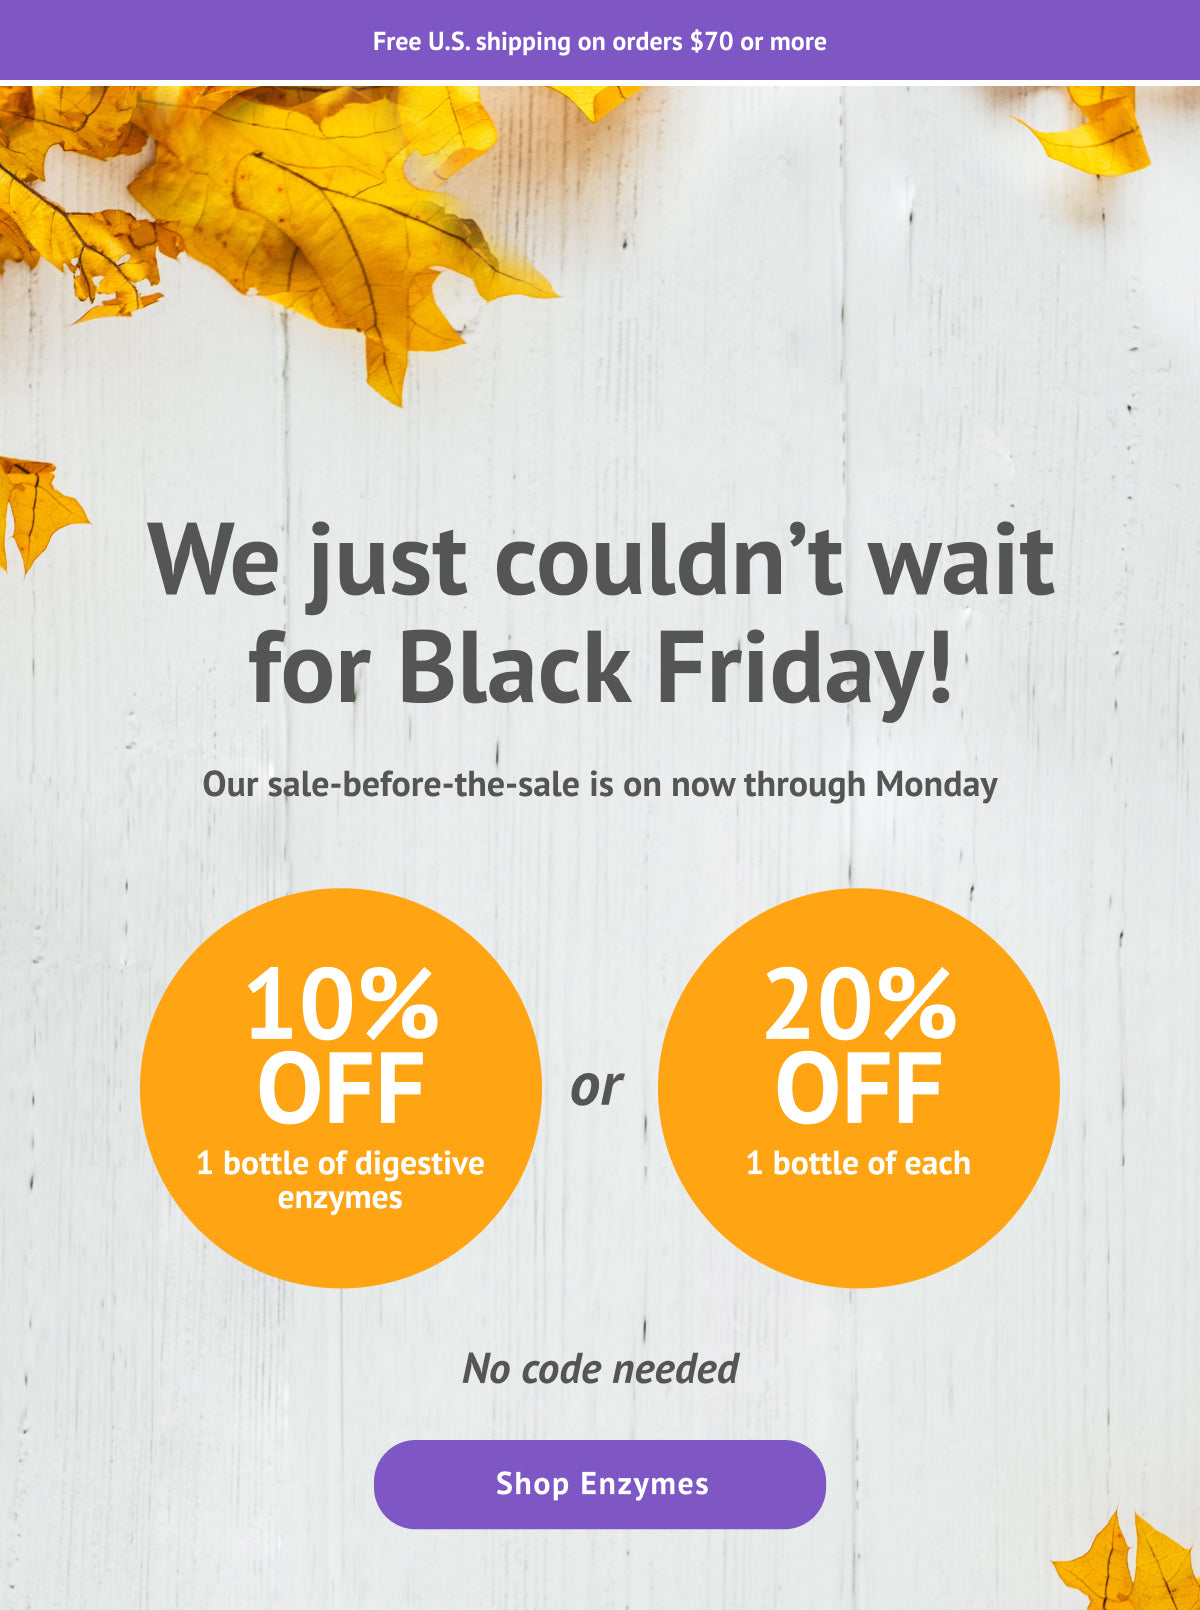 Example of an email banner, telling customers they couldn't wait until Black Friday so they're sharing deals now